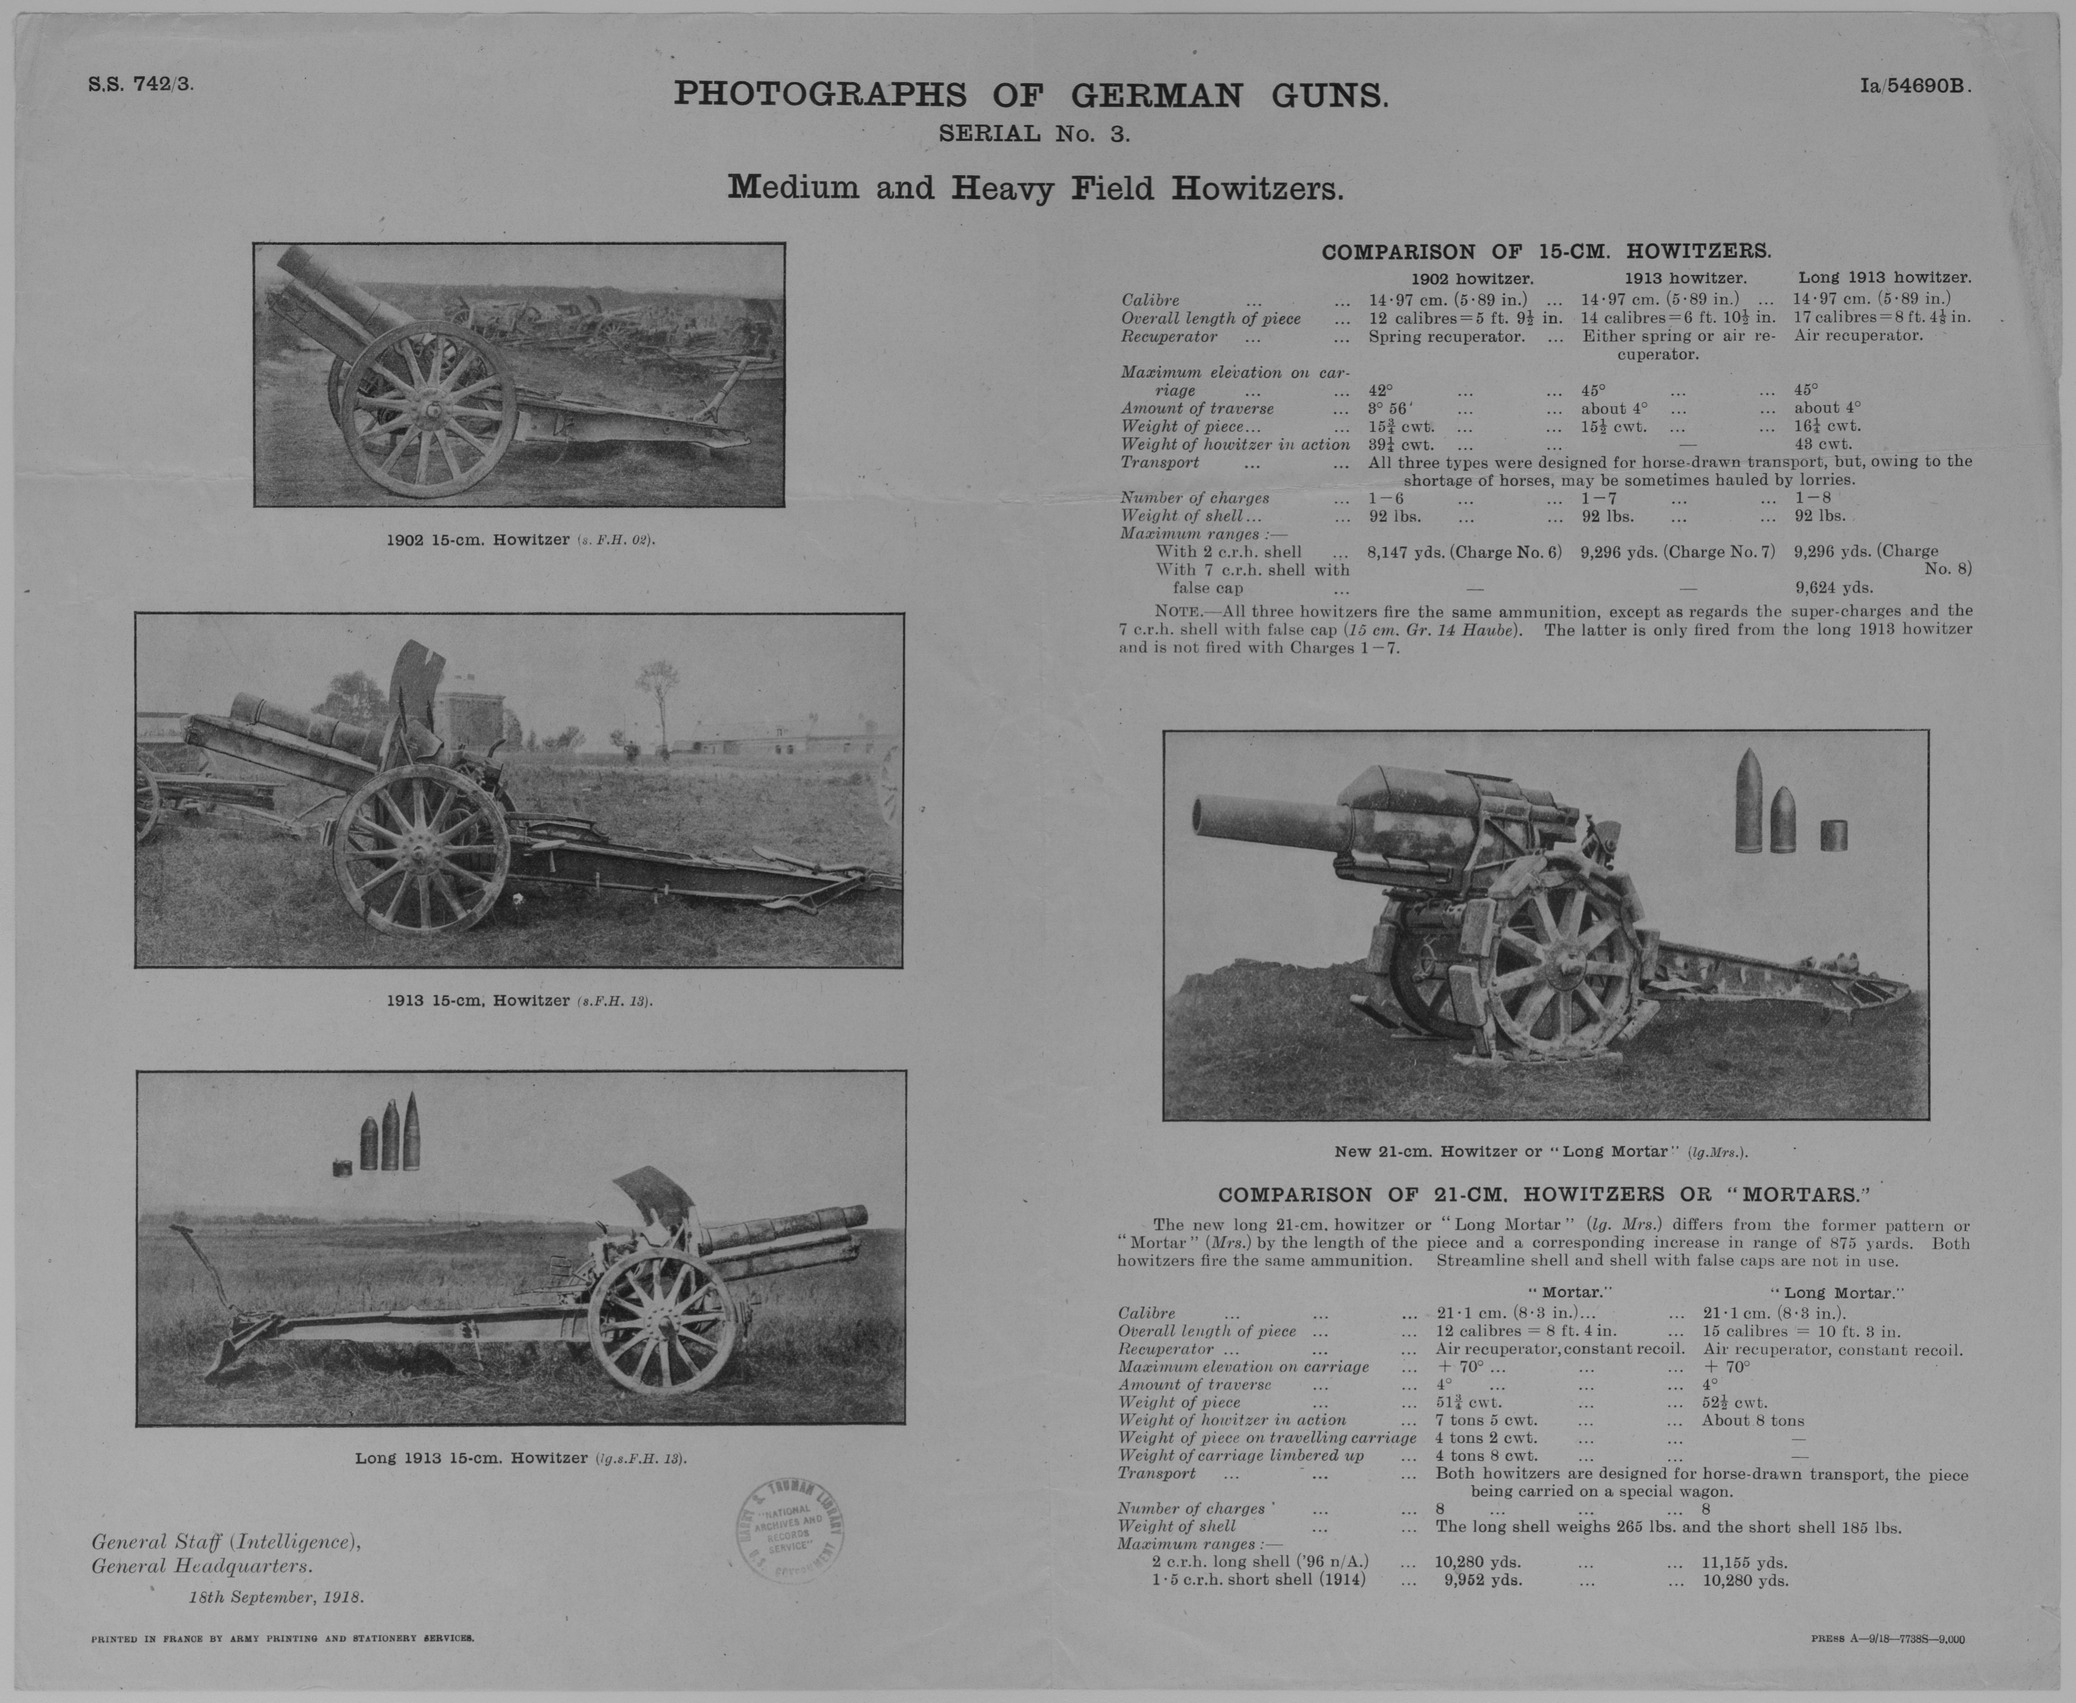 Chart, Photographs of German Guns, Serial Number 3, Medium and Heavy Field Howitzers